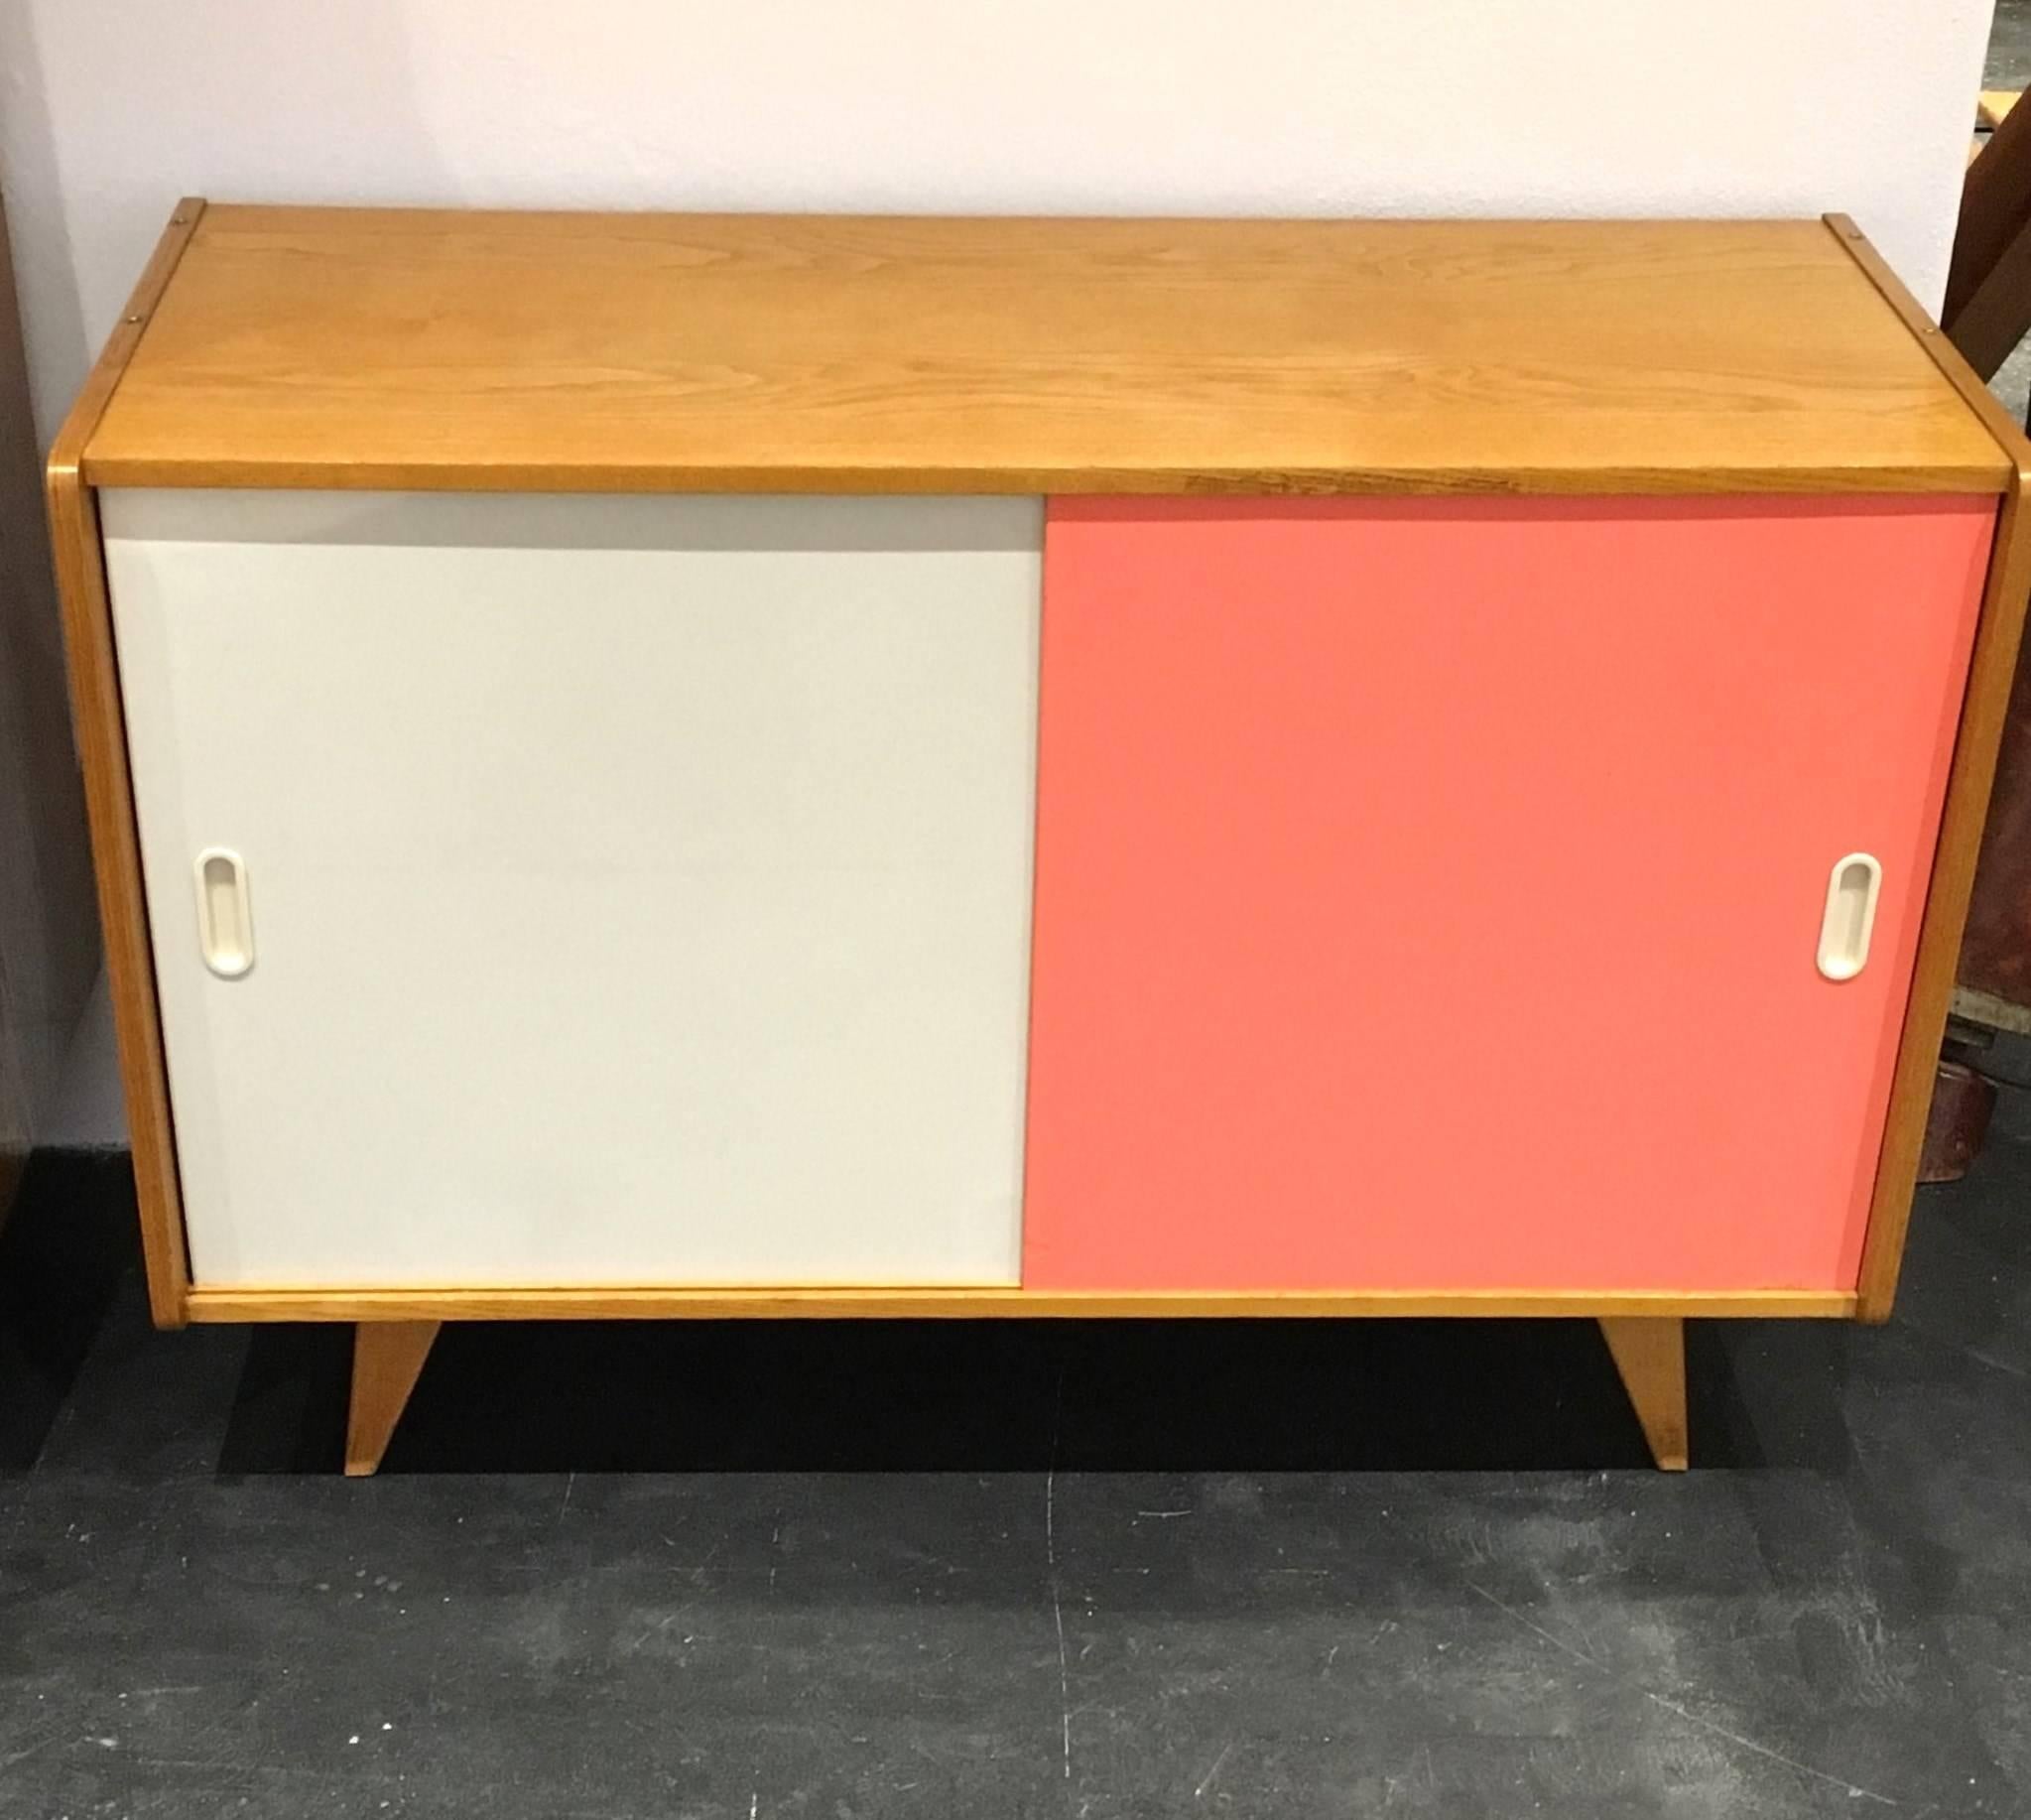 Mid-Century sideboard by Jiri Jiroutek for Interier Praha, dating from the 1960s,
featuring two sliding doors with pink and gray fronts from the former Czechoslovakia.
Completely restored.

We offer shop to door delivery worldwide. Please ask